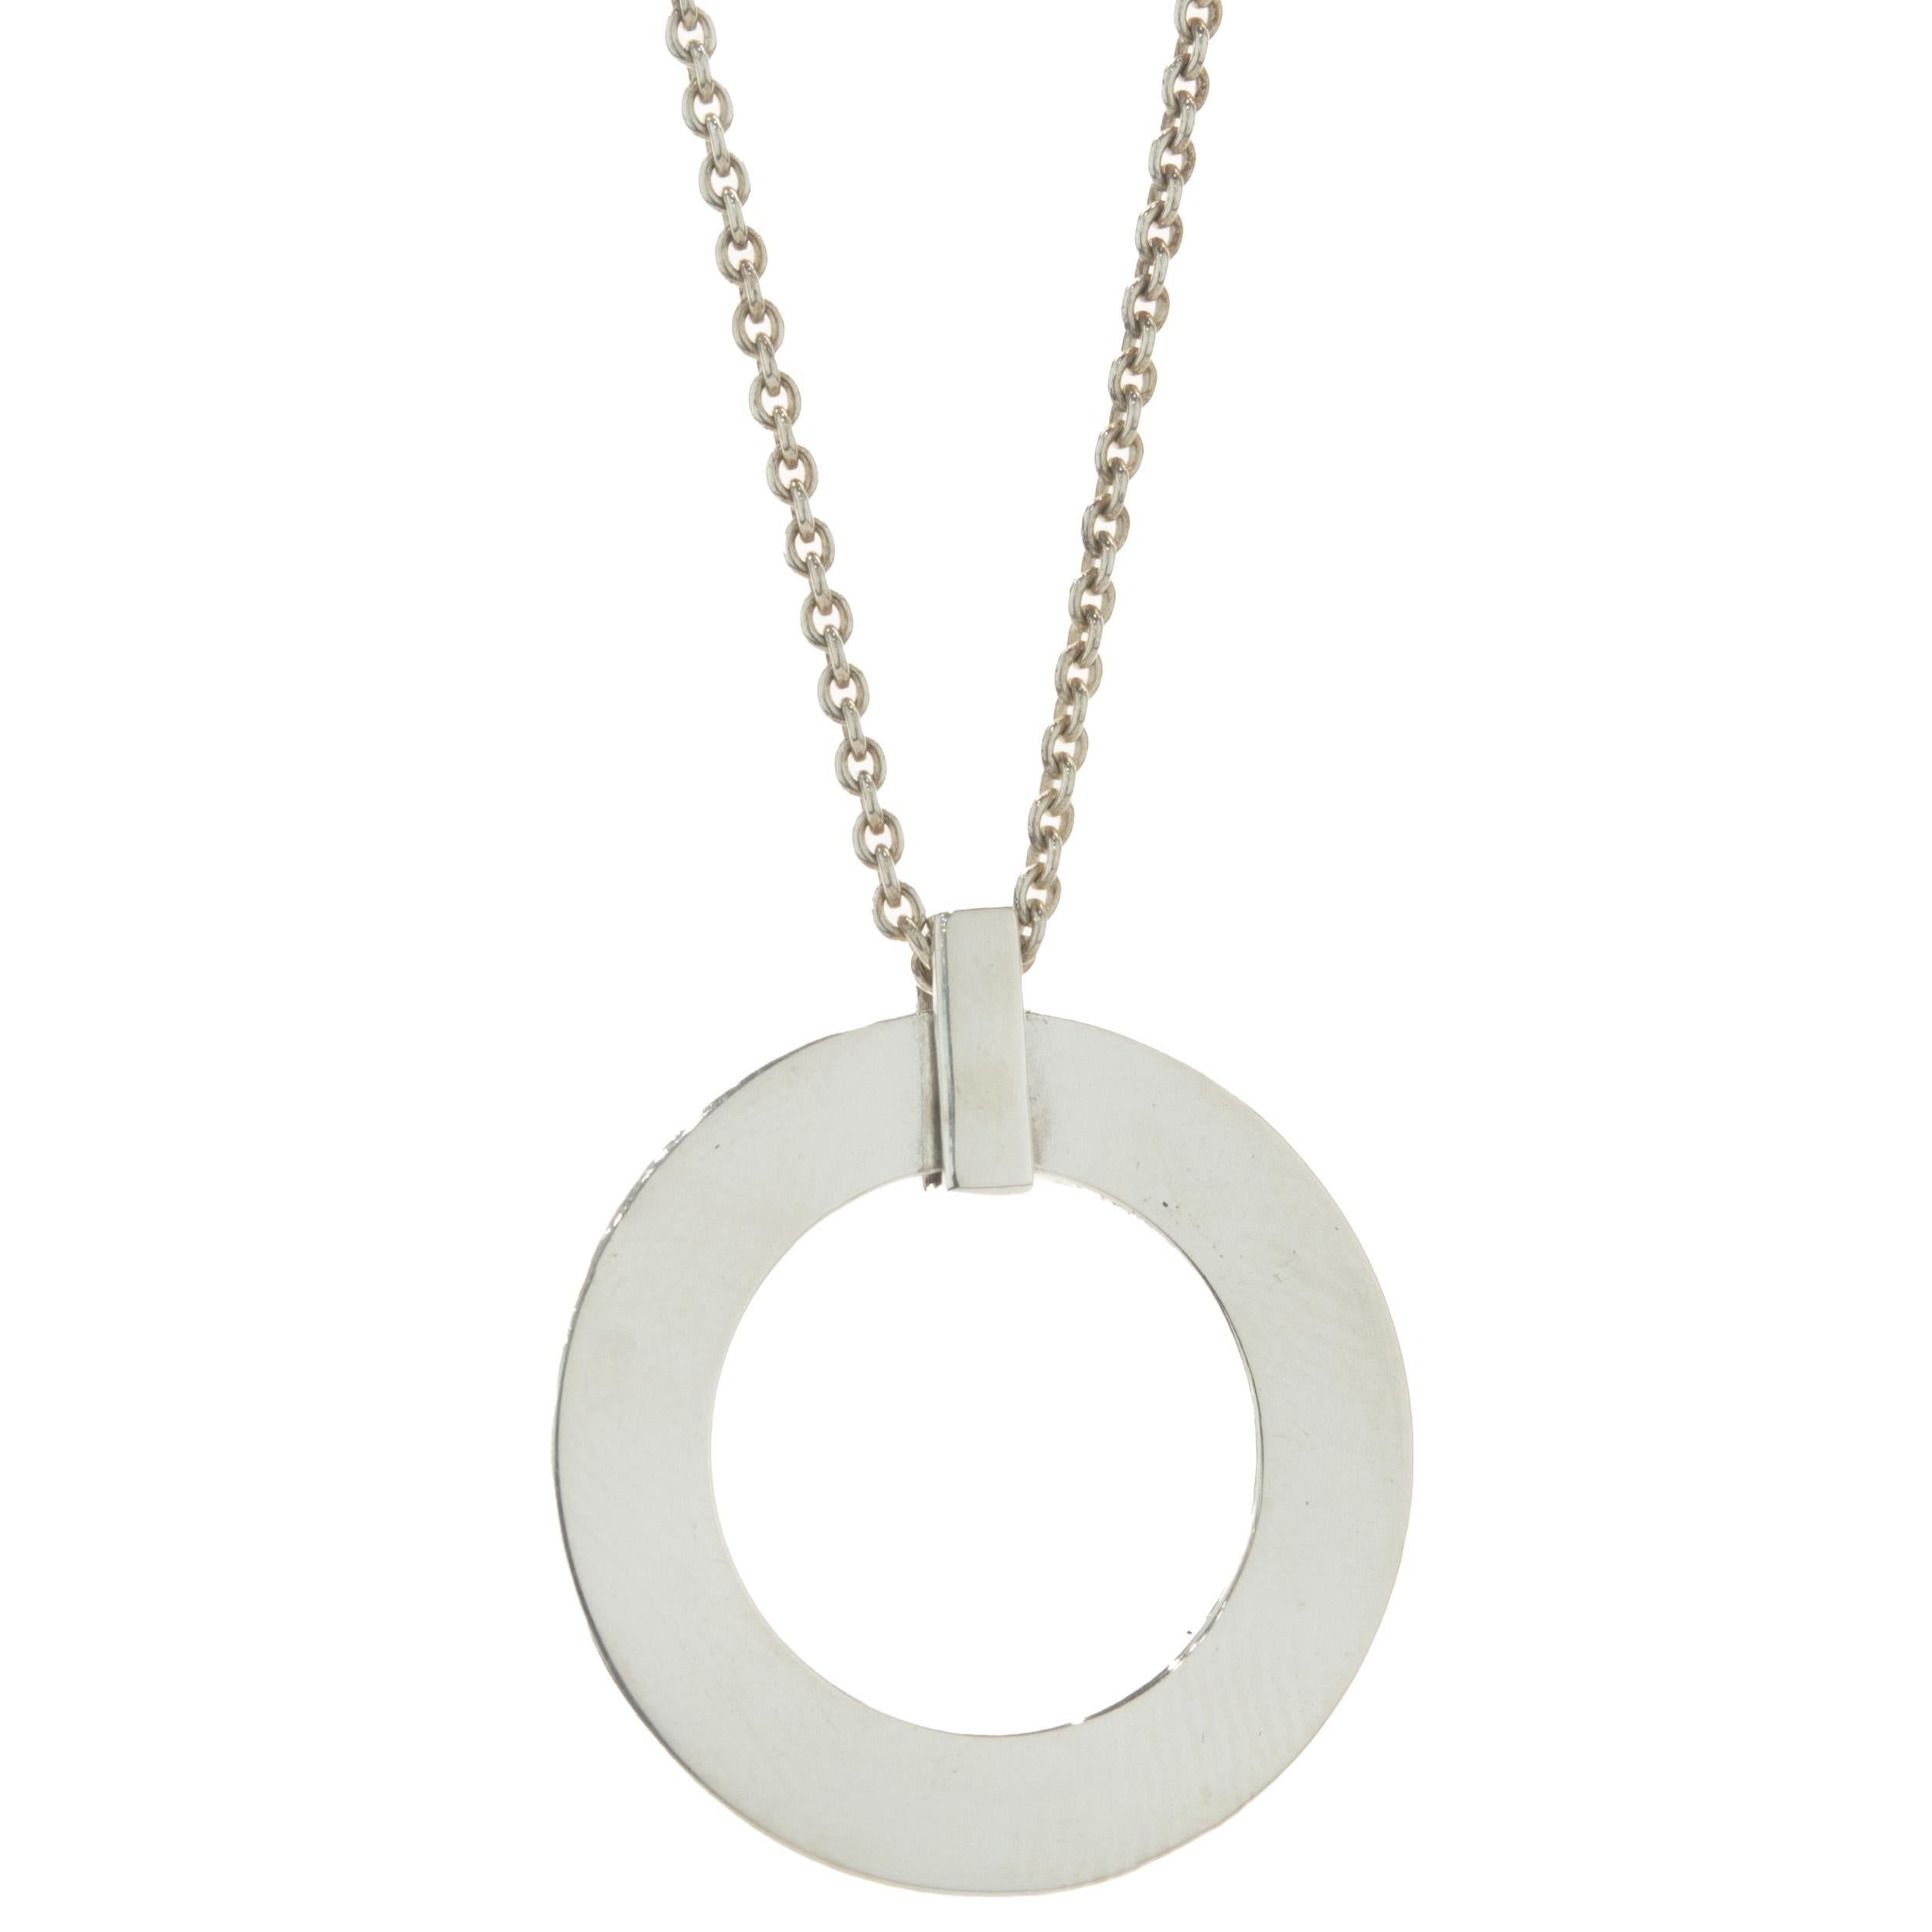 Designer: Tiffany & Co. 
Material: sterling silver
Dimensions: necklace measures 18-inches
Weight: 7.27 grams
